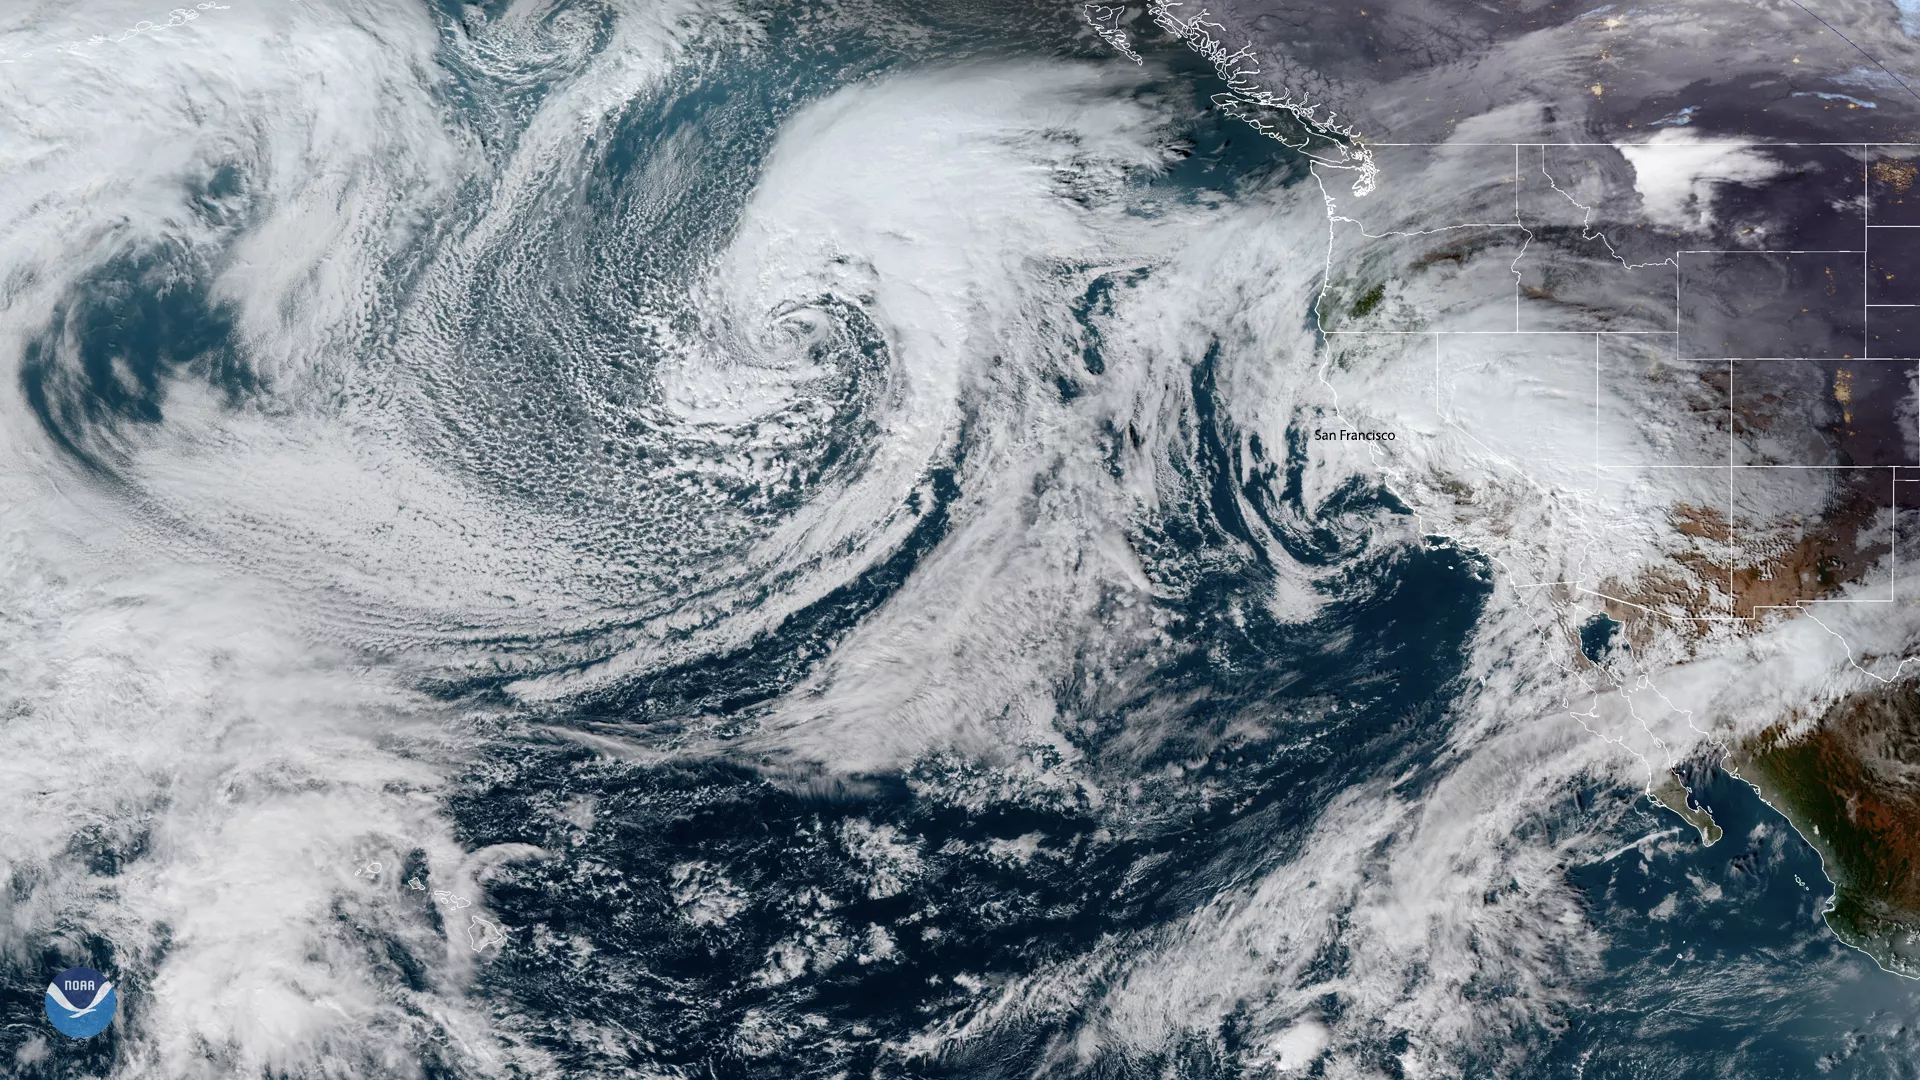 Low pressure system off of the California coast, captured with merged GOES GeoColor imagery, Dec. 2019. 